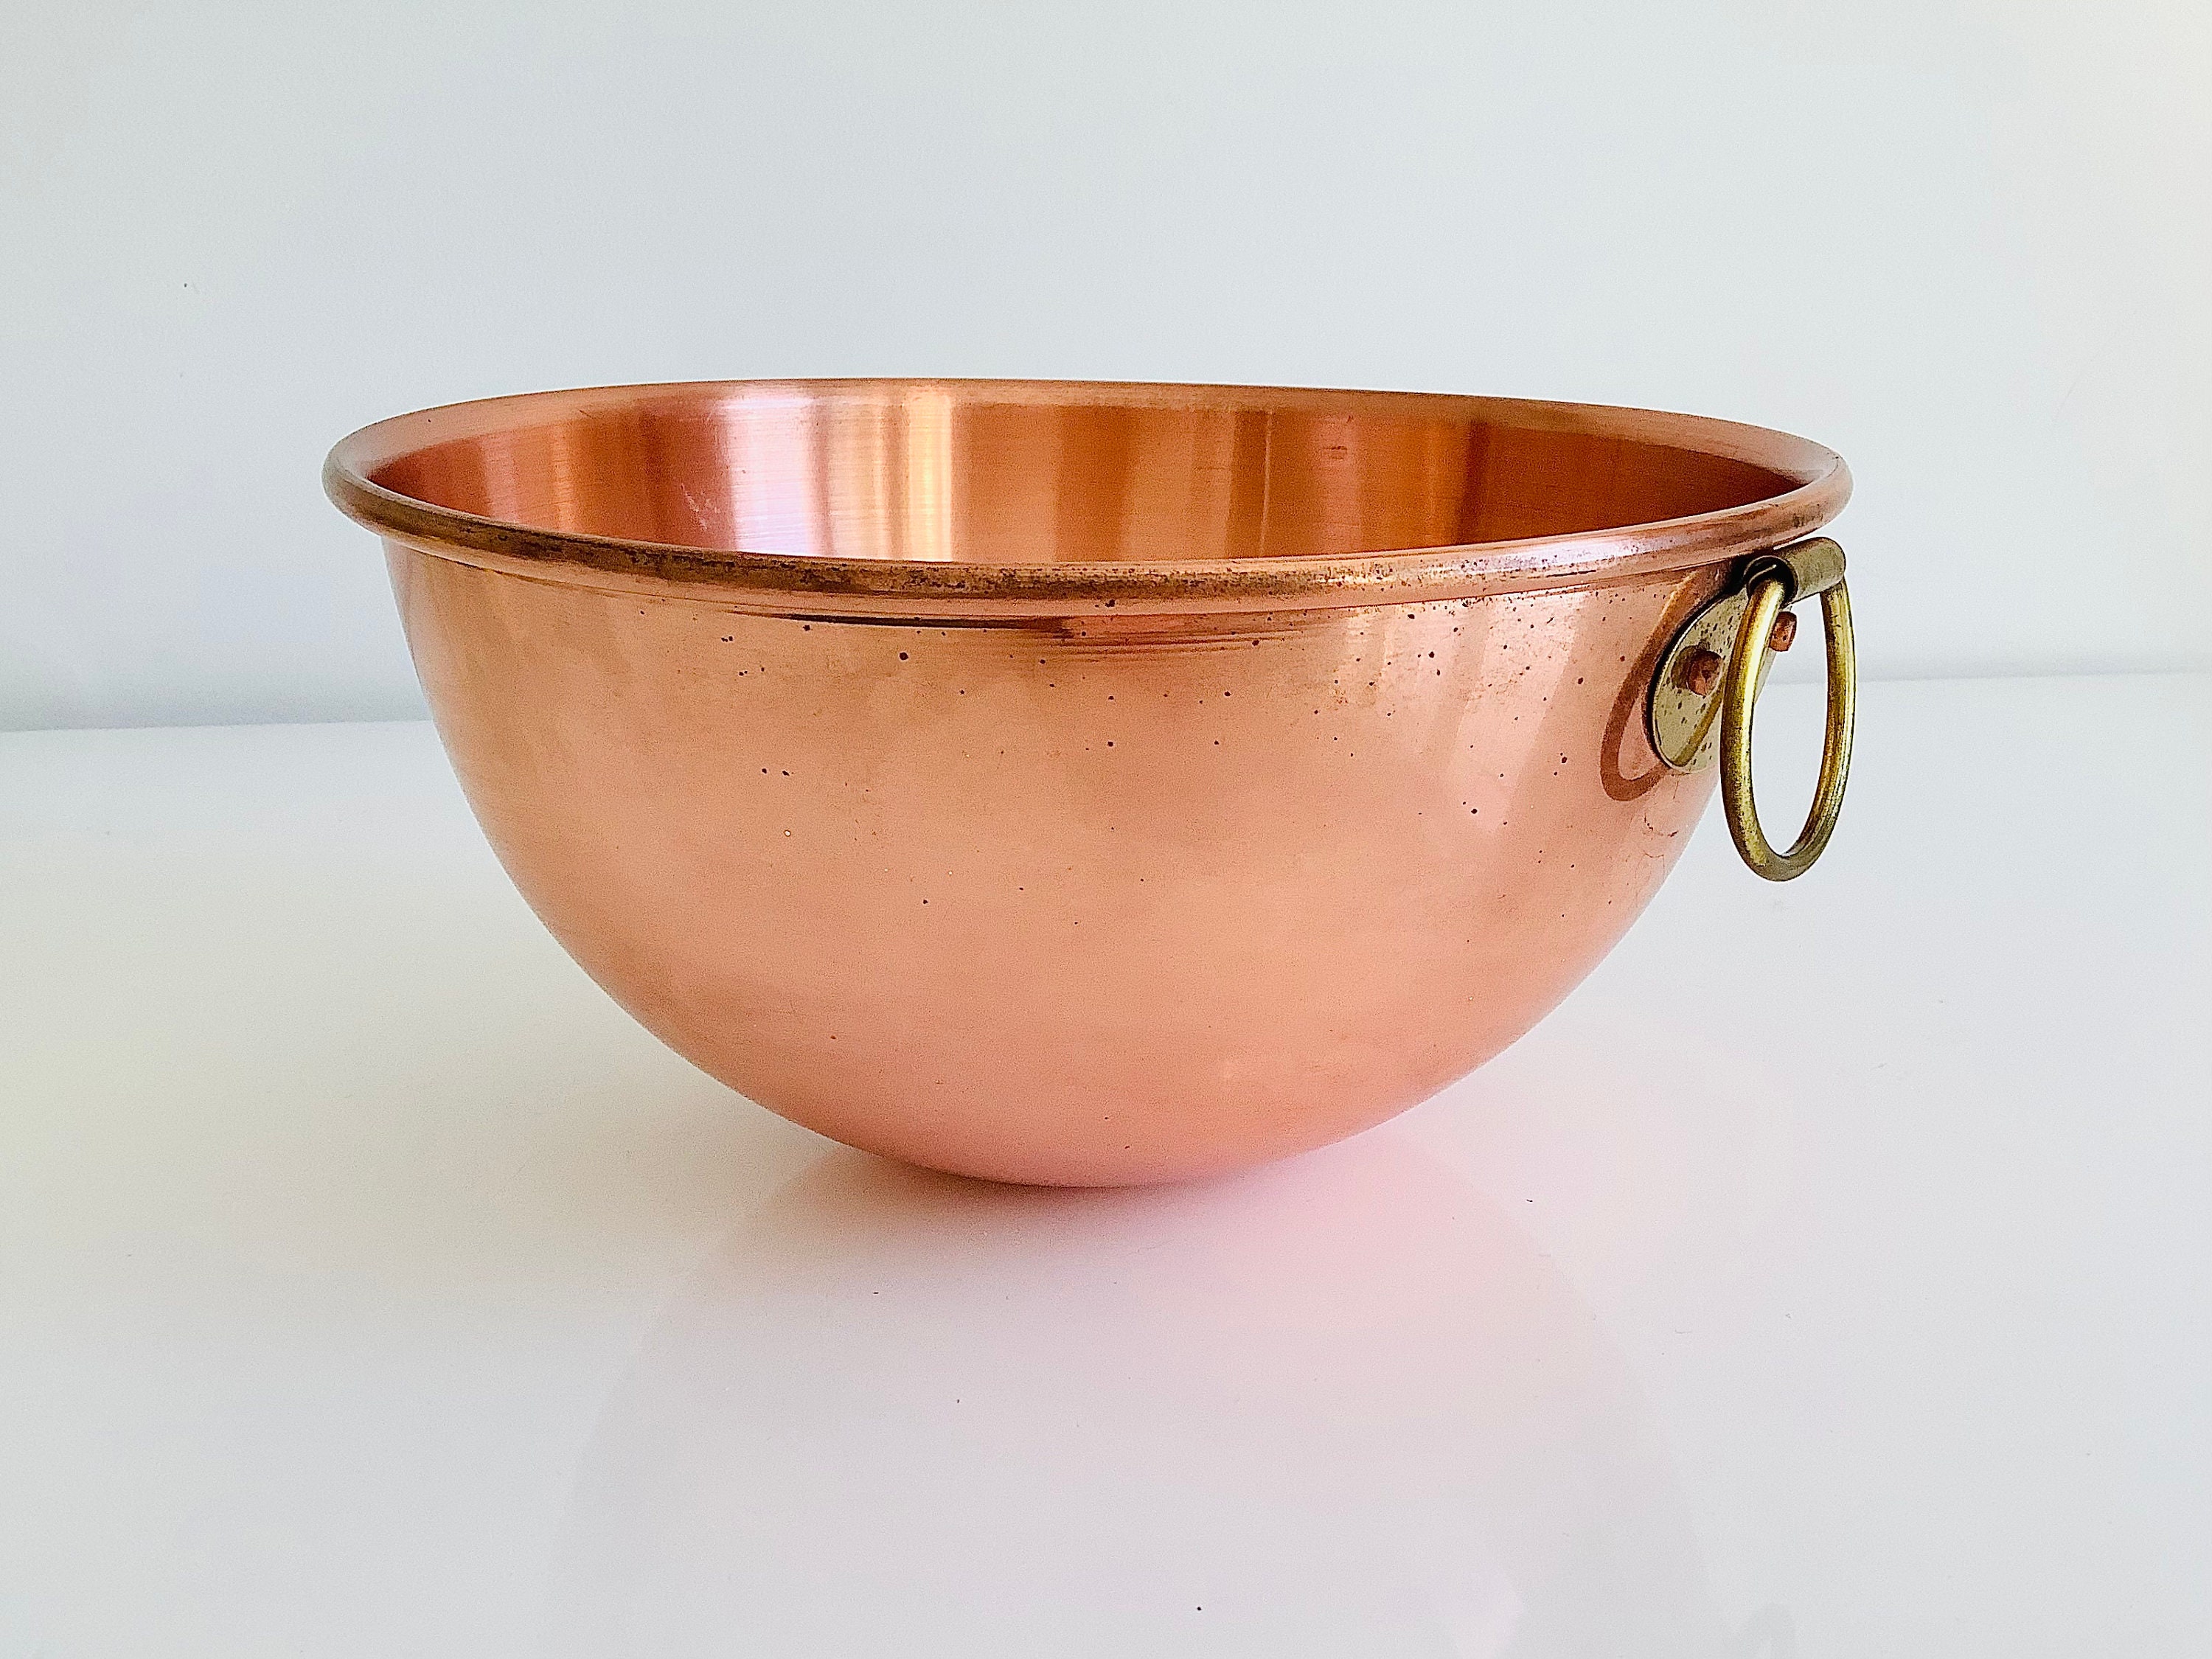 Vintage Copper Mixing Bowl / Small Metal Bowl With Brass Ring for